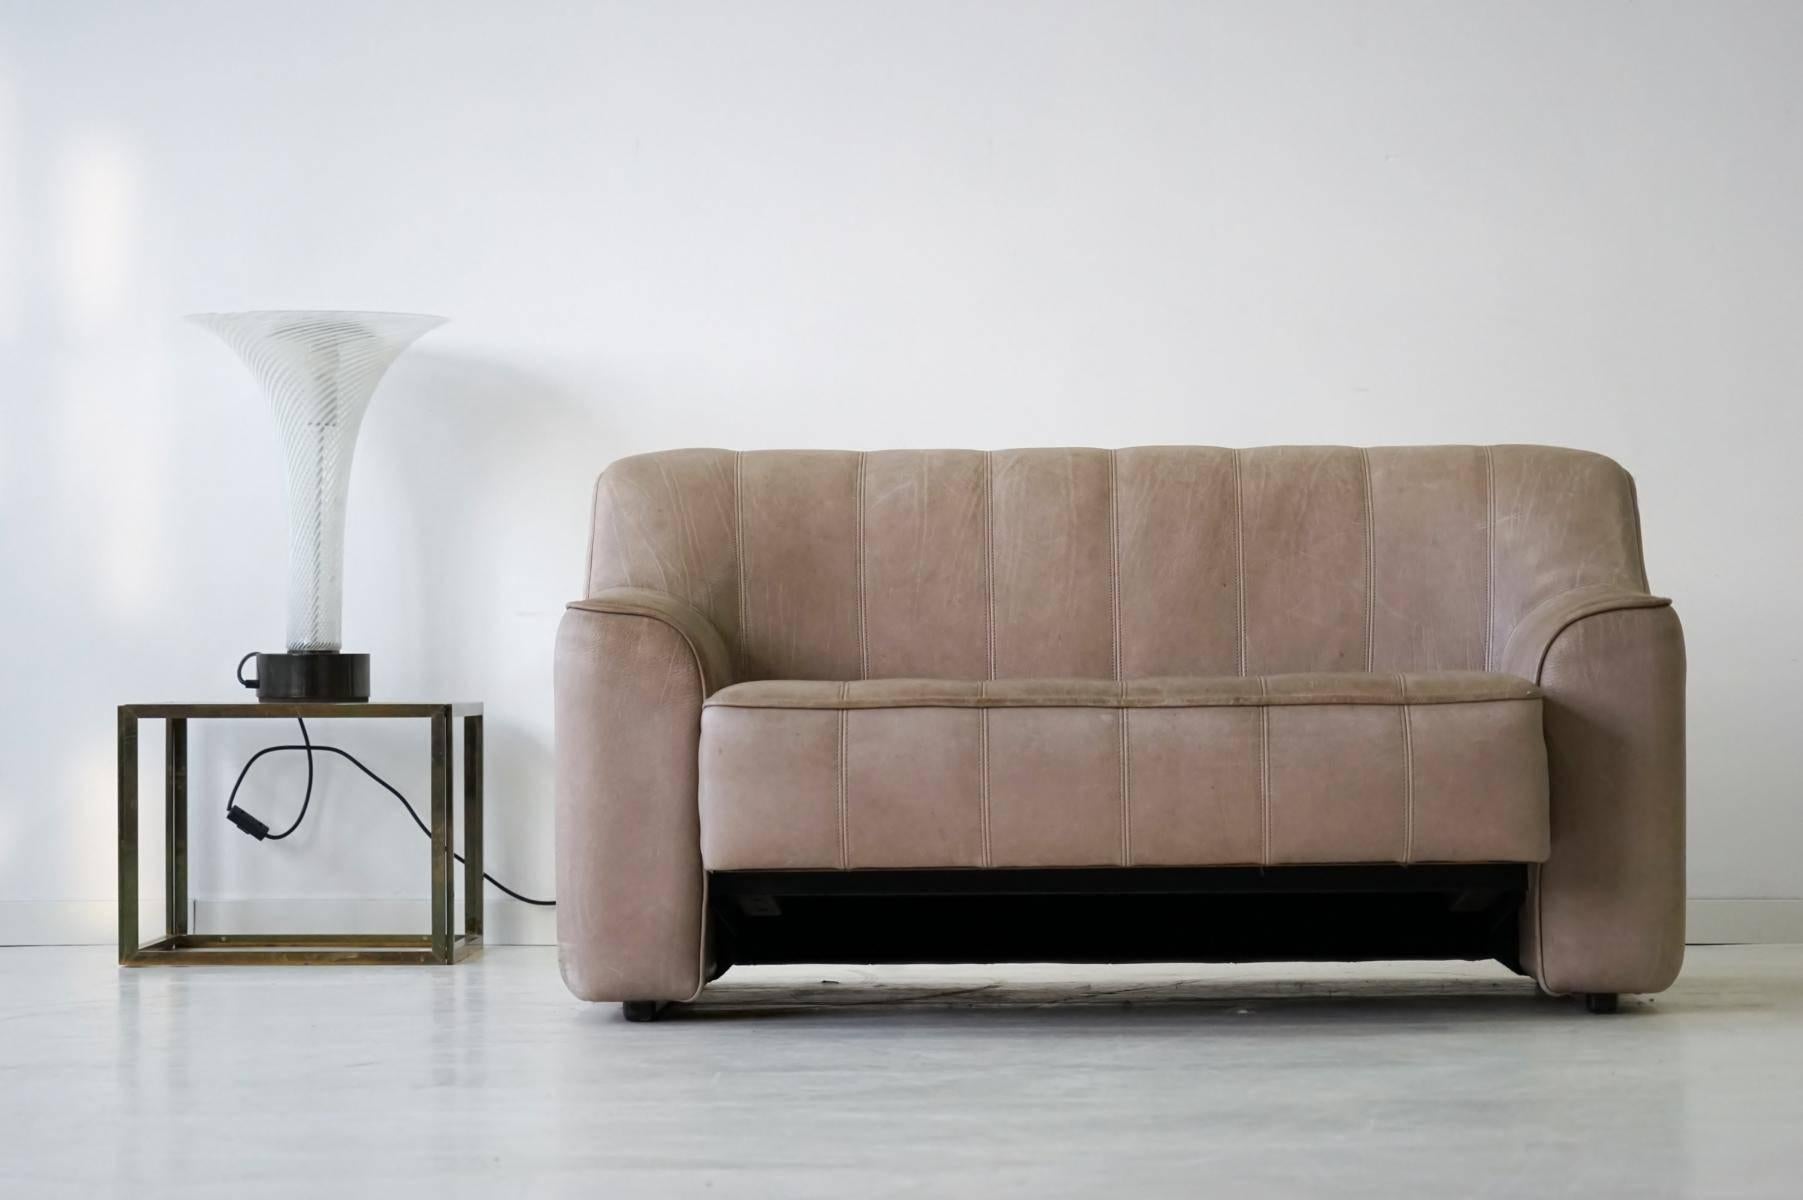 Two-Seat Ds 44 Sofa by De Sede Neck Leather Extendable Seat 1